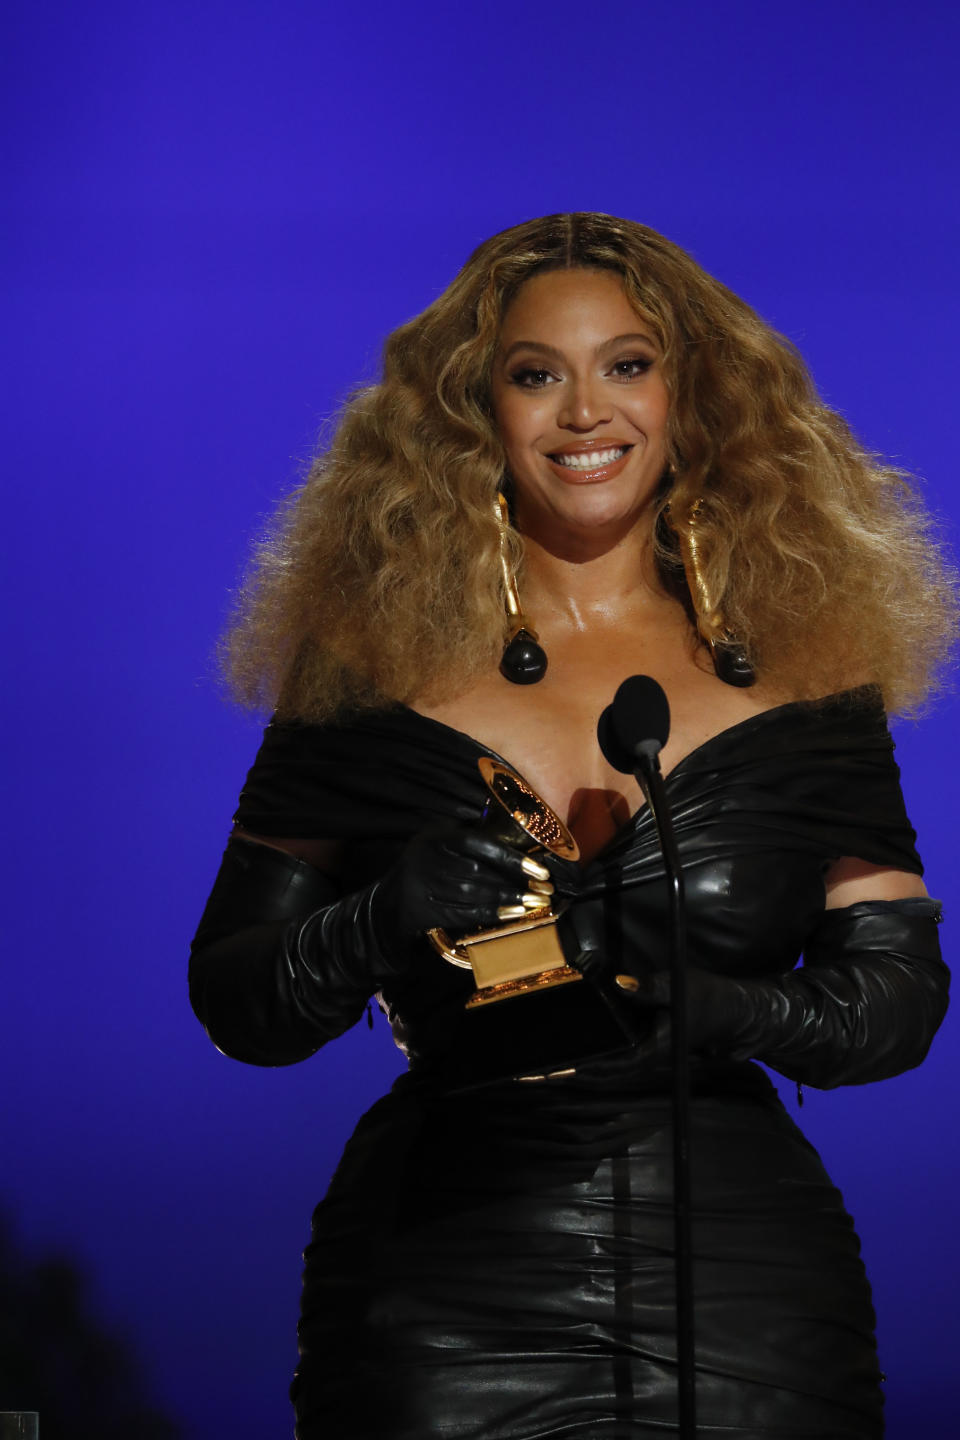 Beyonce accepting a Grammy